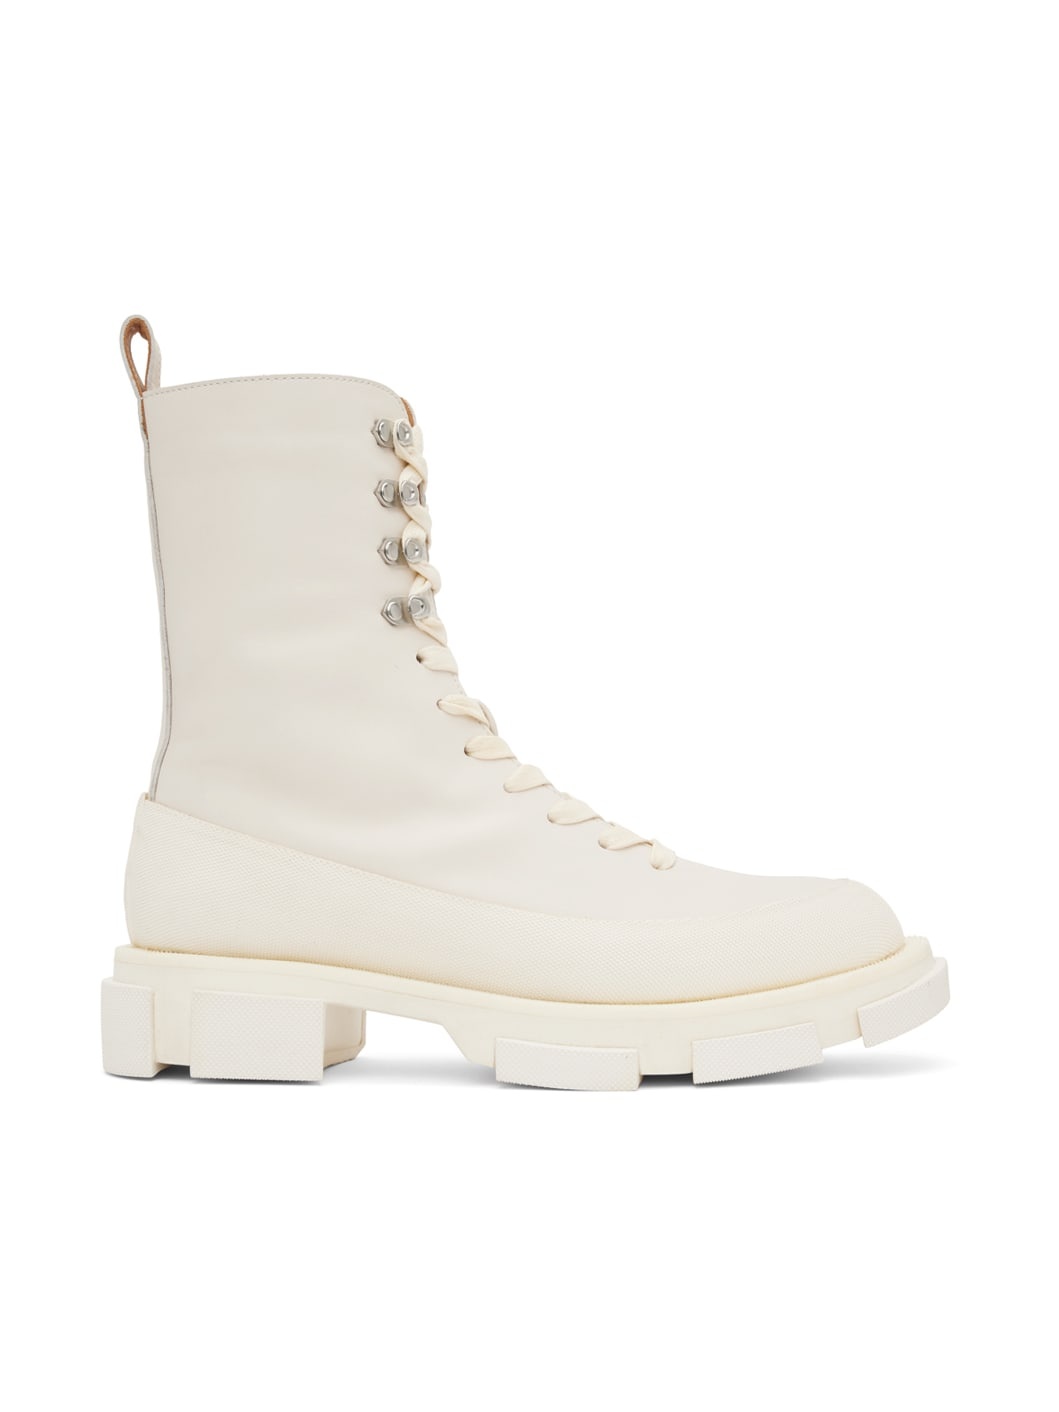 Off-White Gao High Boots - 1